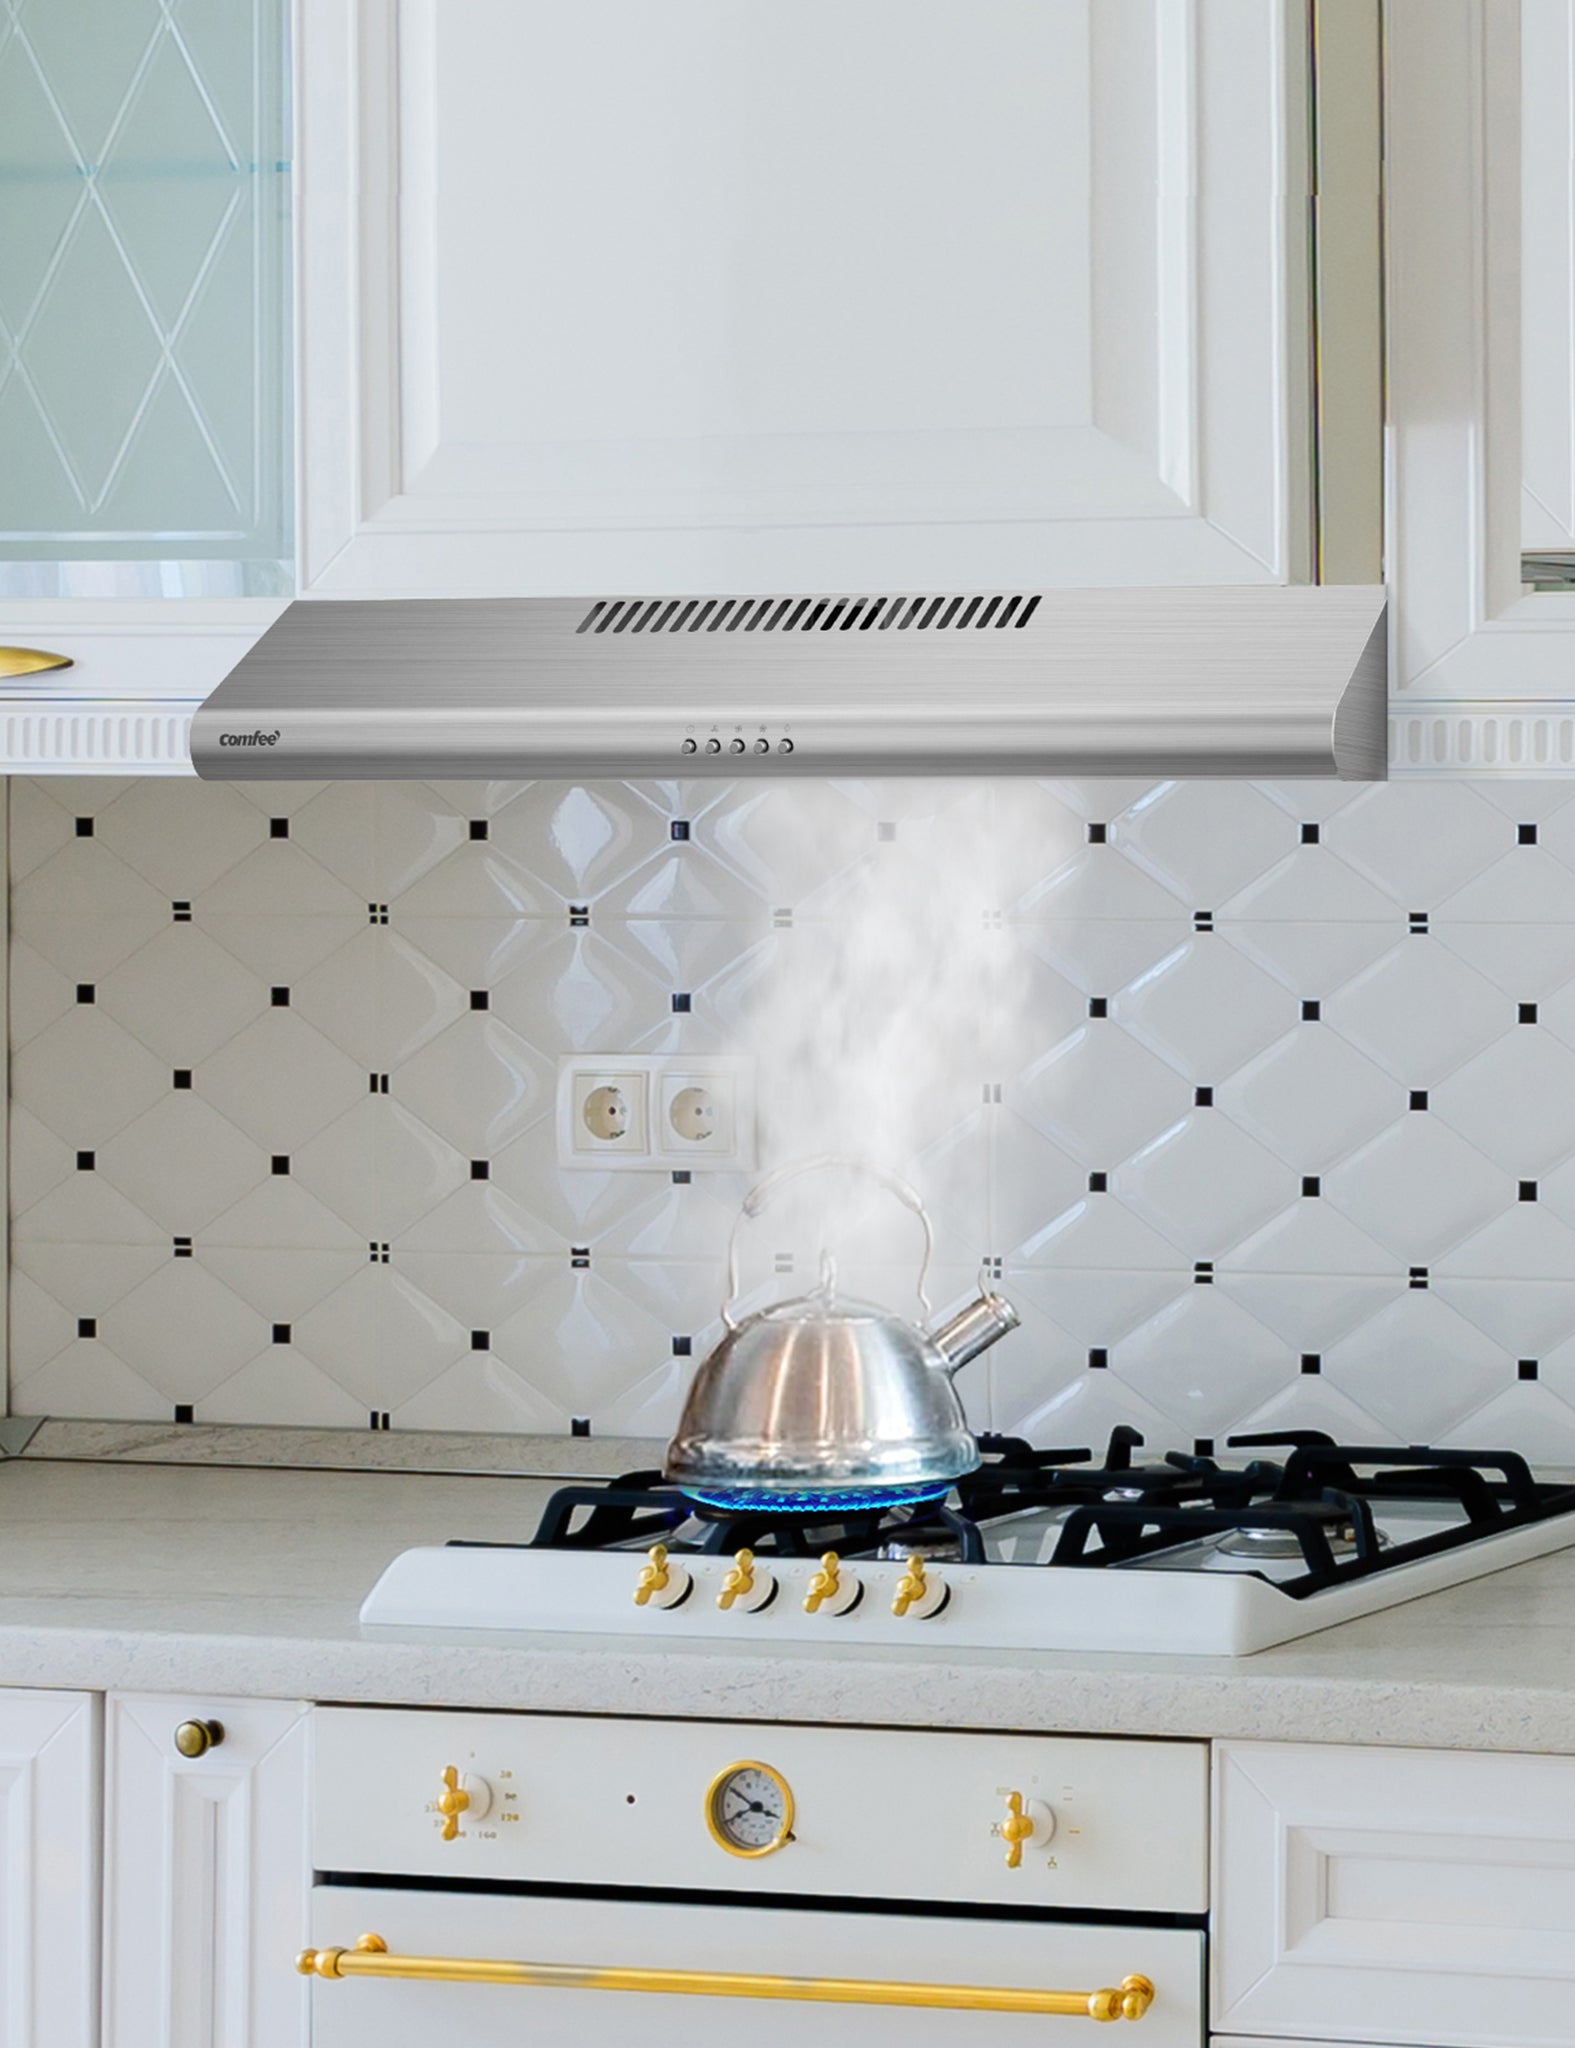 comfee ductless under cabinet filtering smoke from a teapot on stovetop